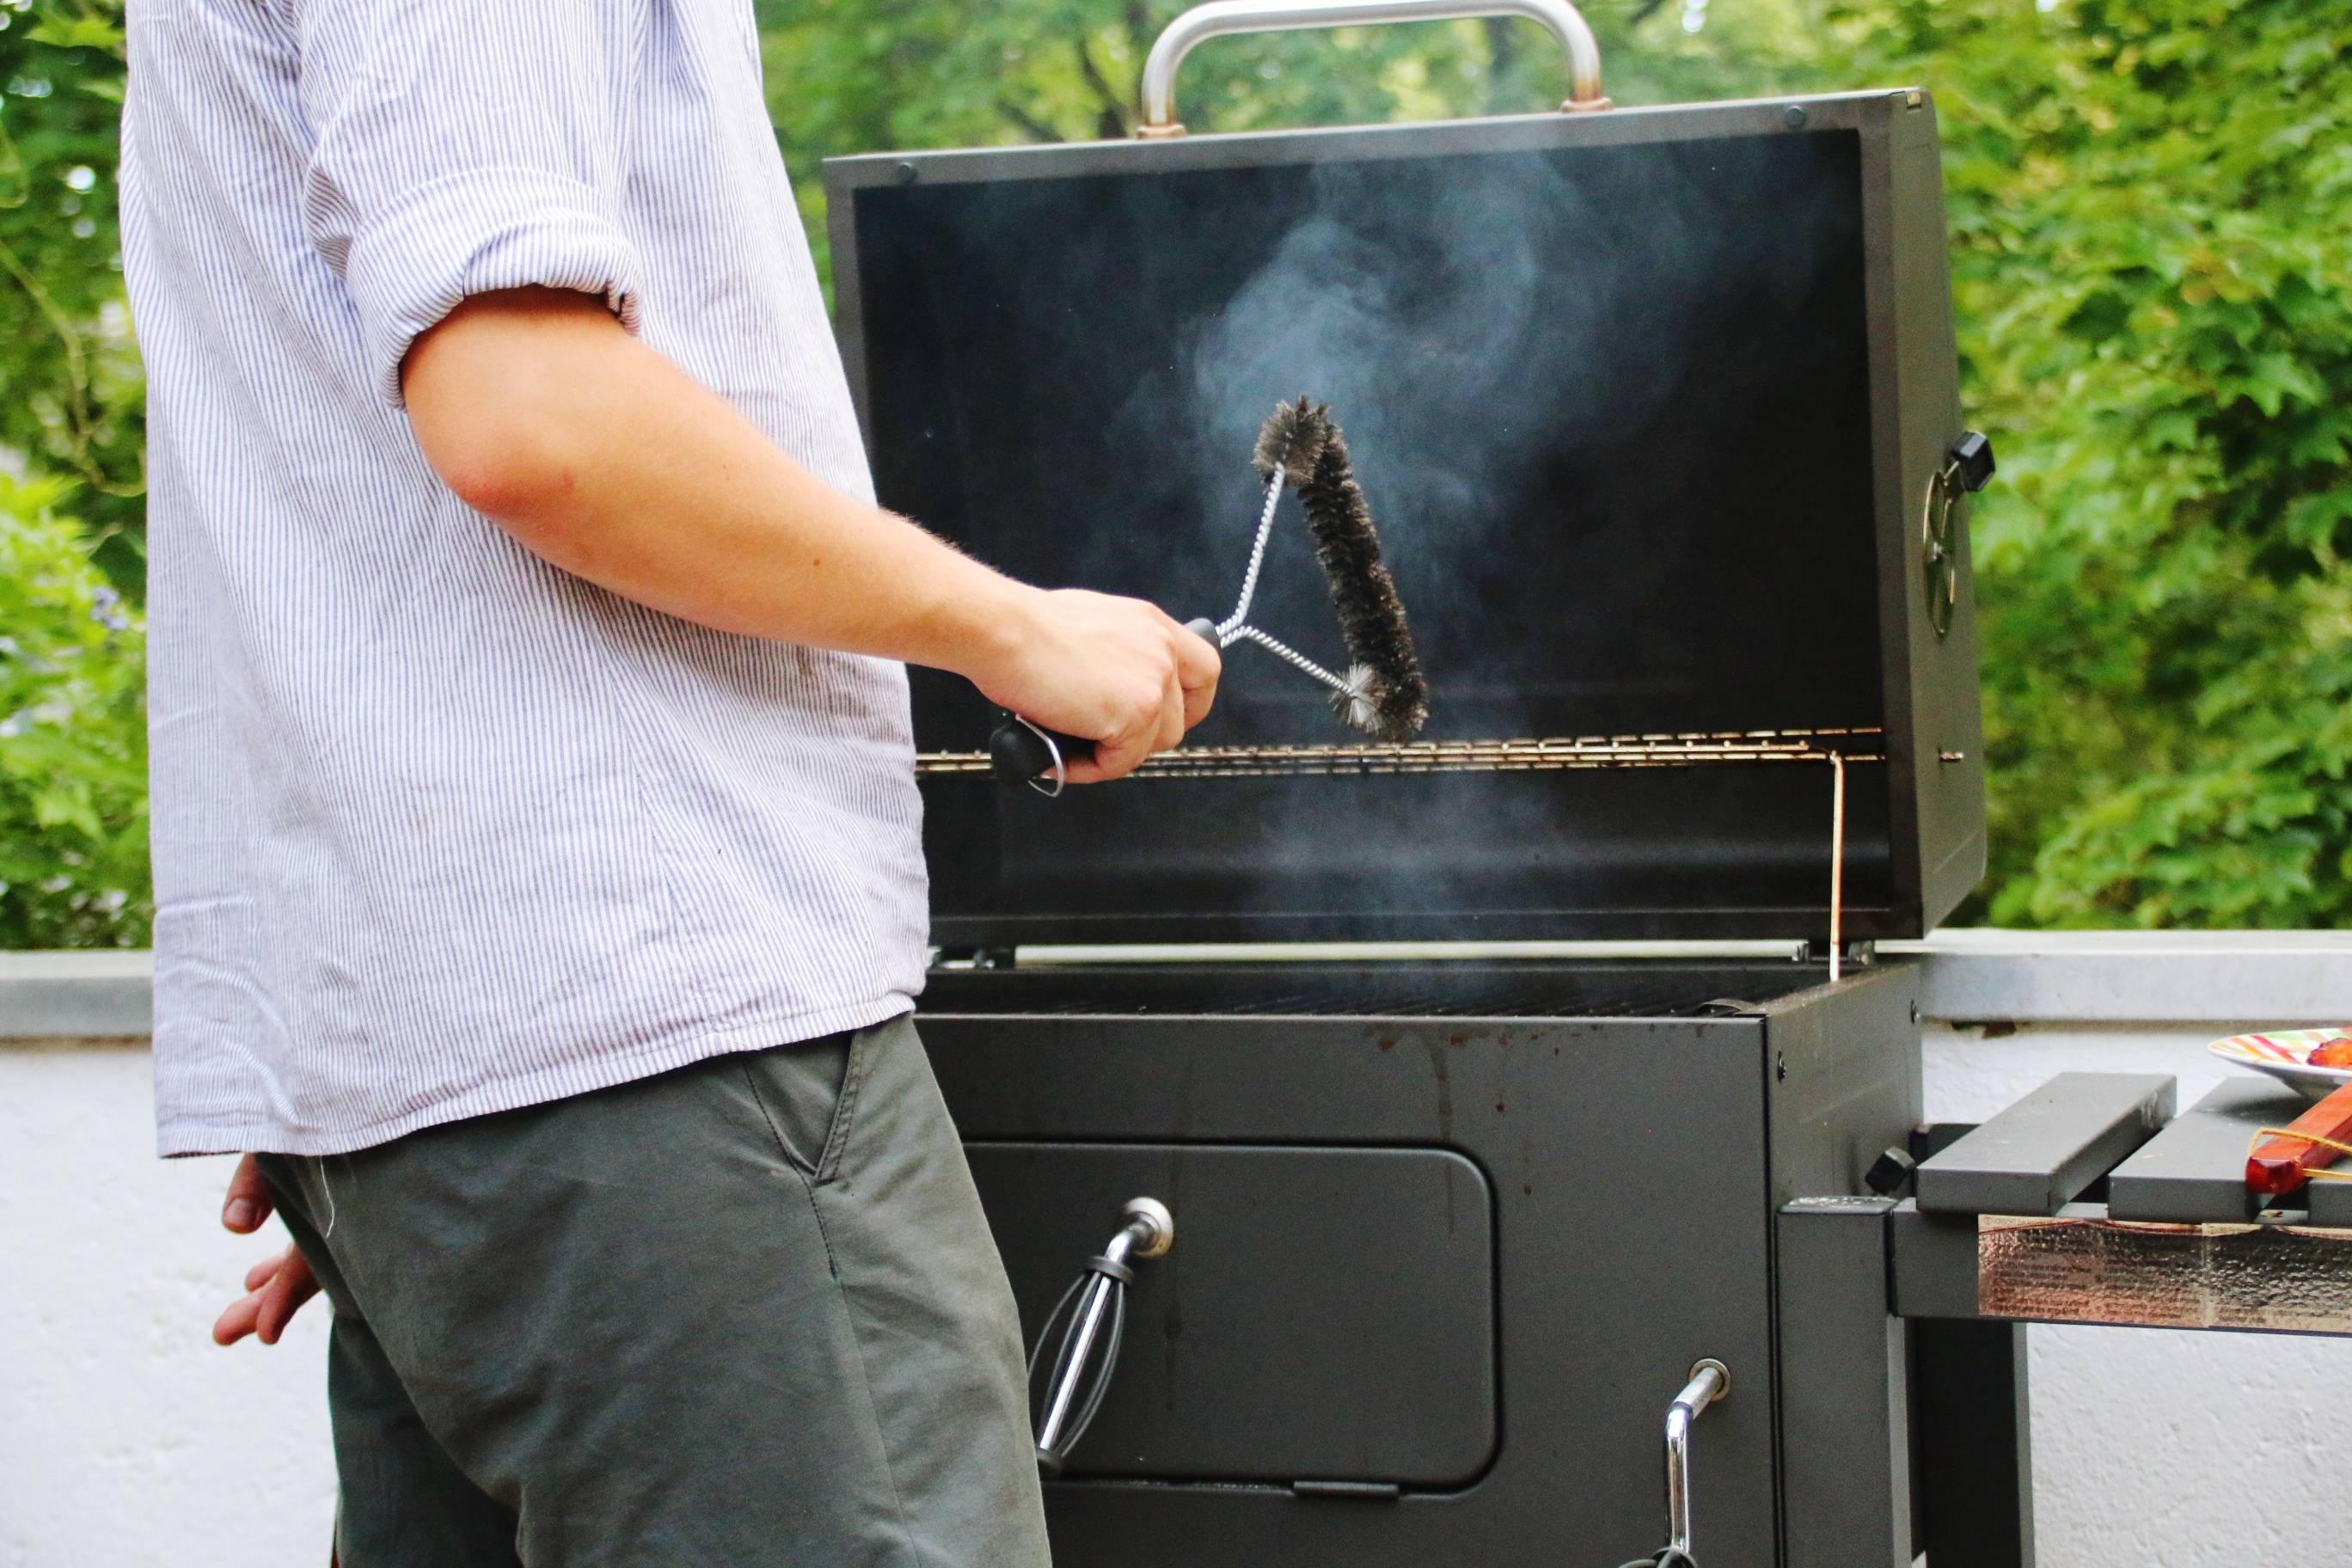 How to use a charcoal grill
